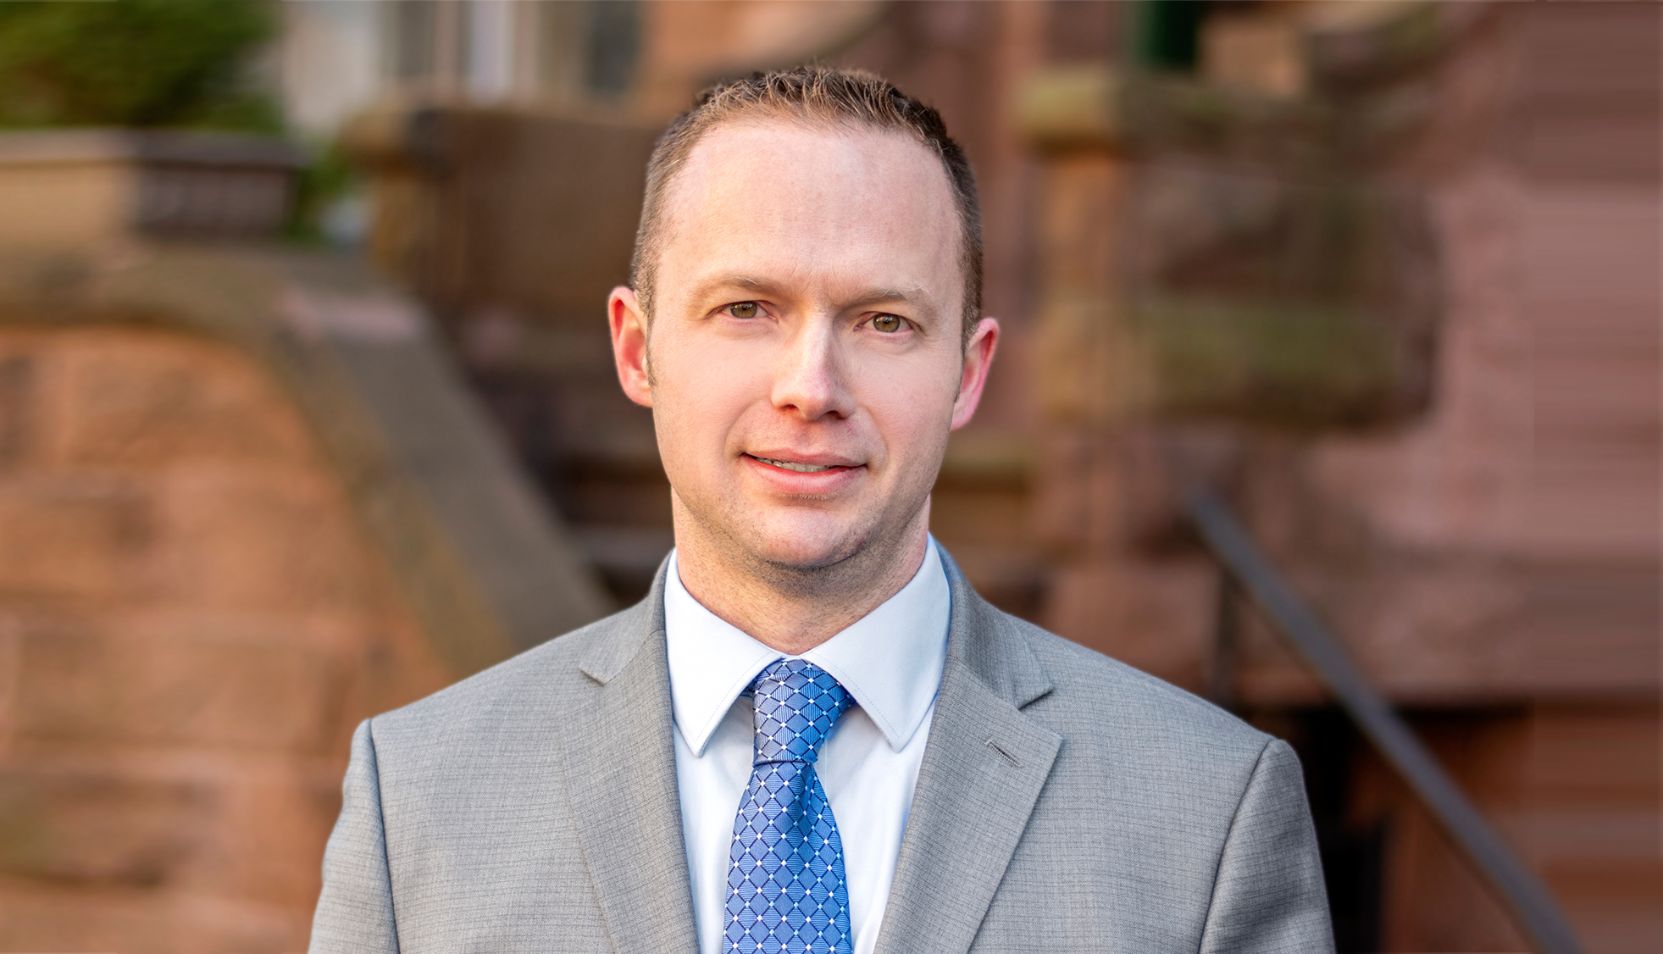 Adam Glaser is a Licensed Associate Real Estate Broker at HomeDax Real Estate NYC. Contact Adam today to discuss your sale, purchase or rental needs.